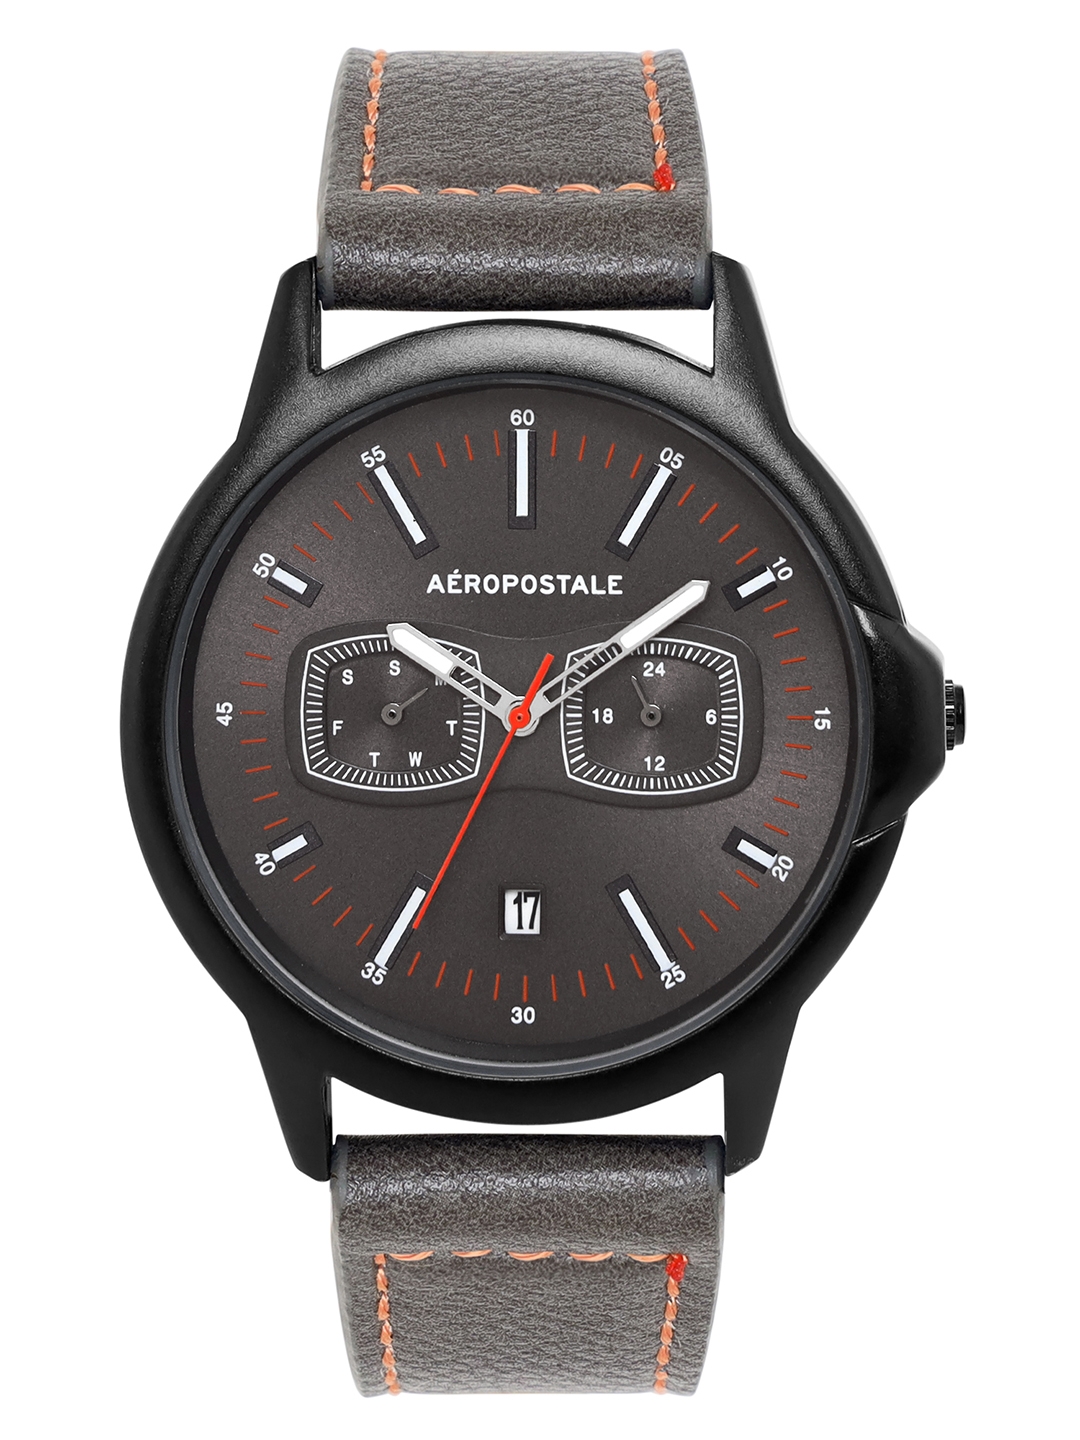 Aeropostale | Aeropostale "AERO_AW_A8-2_DGRY" Classic Men’s Analog Quartz Wrist Watch, Black Metal Alloy case, Classic Green Dial with contrasting white hand, Leather  wrist Band  Water resistant 3.0 ATM.